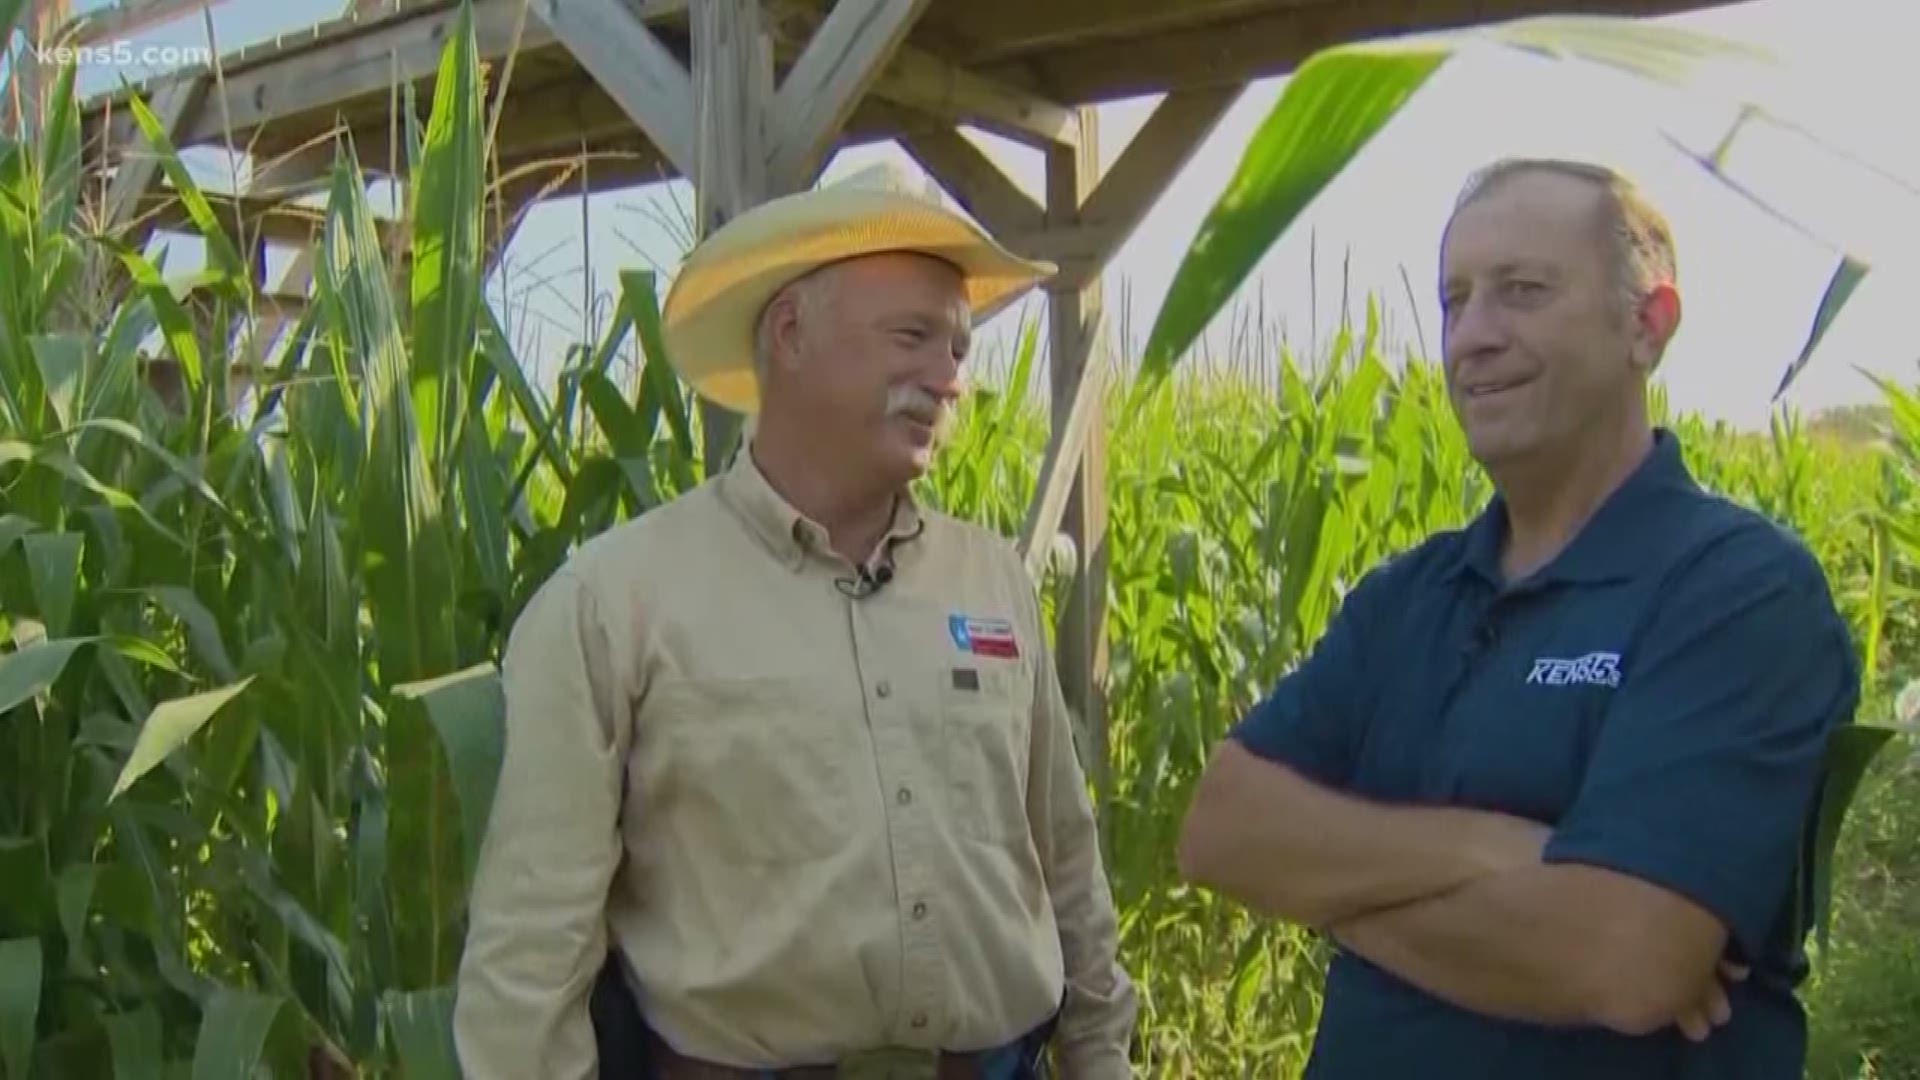 We're headed to a place where you can get lost and have a blast. Join us as we enter the South Texas Corn Maize in Hondo in this week's Texas Outdoors.